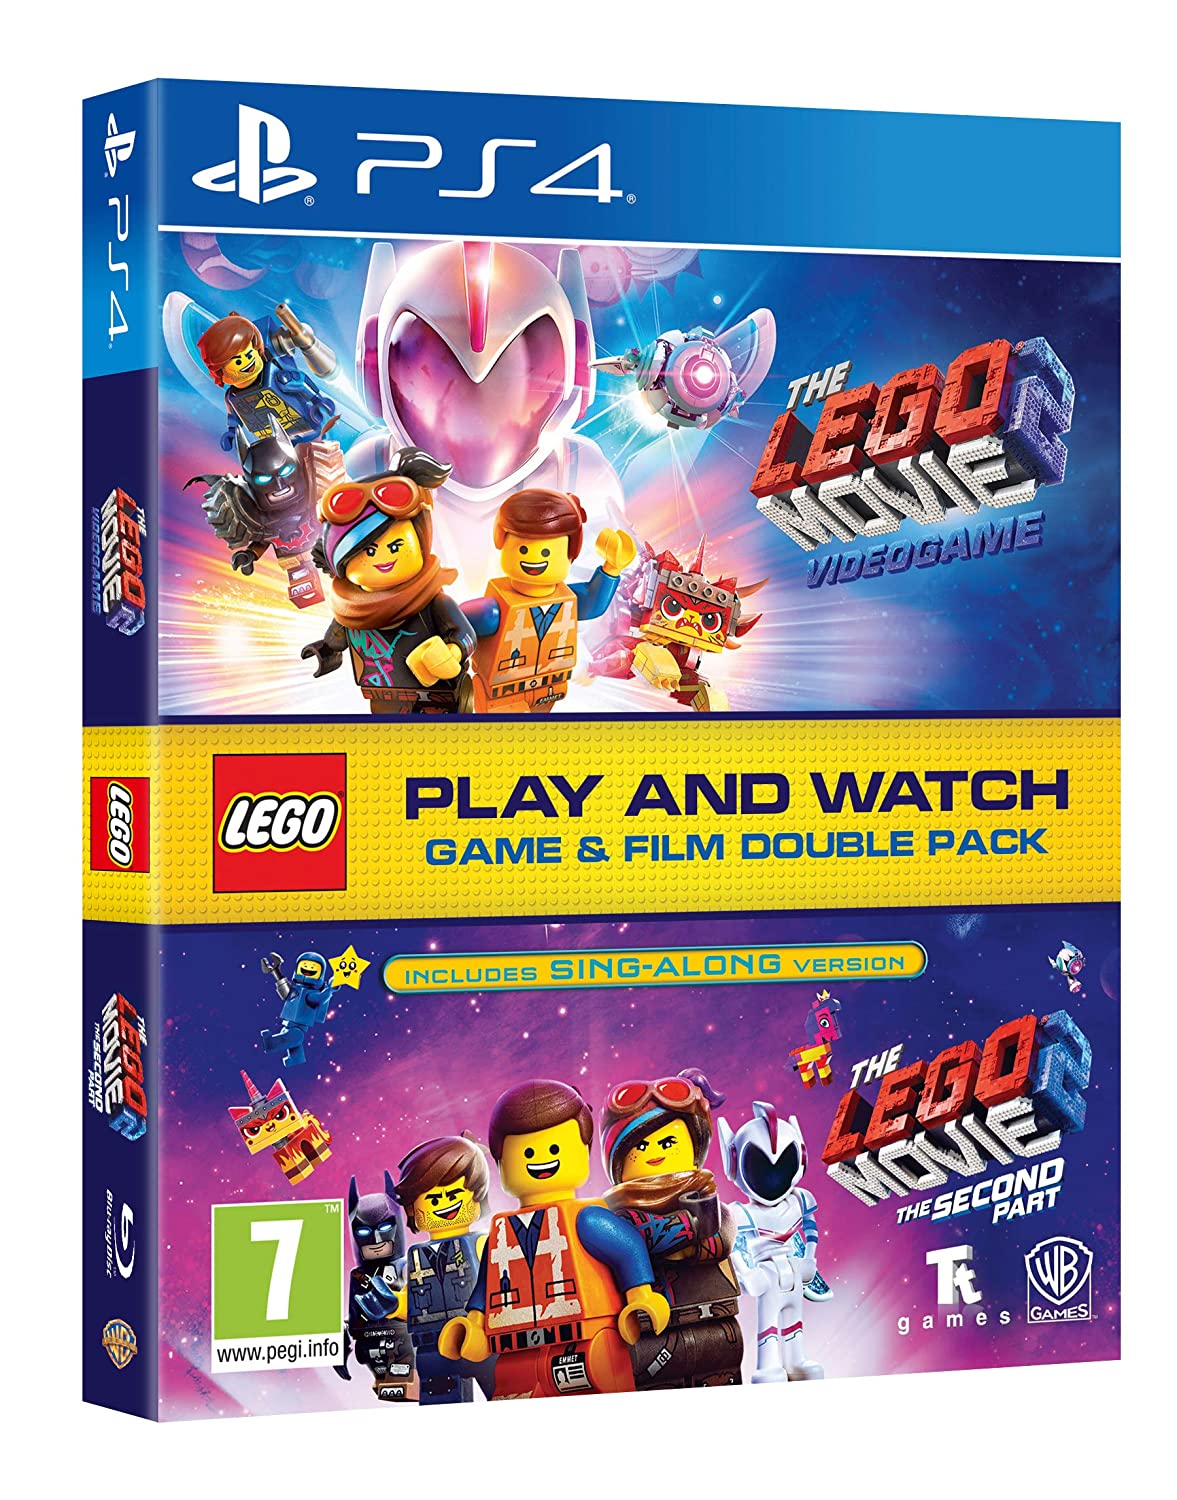 Lego Movie Videogame 2 Play and Watch Double Pack - PlayStation 4 Játékok